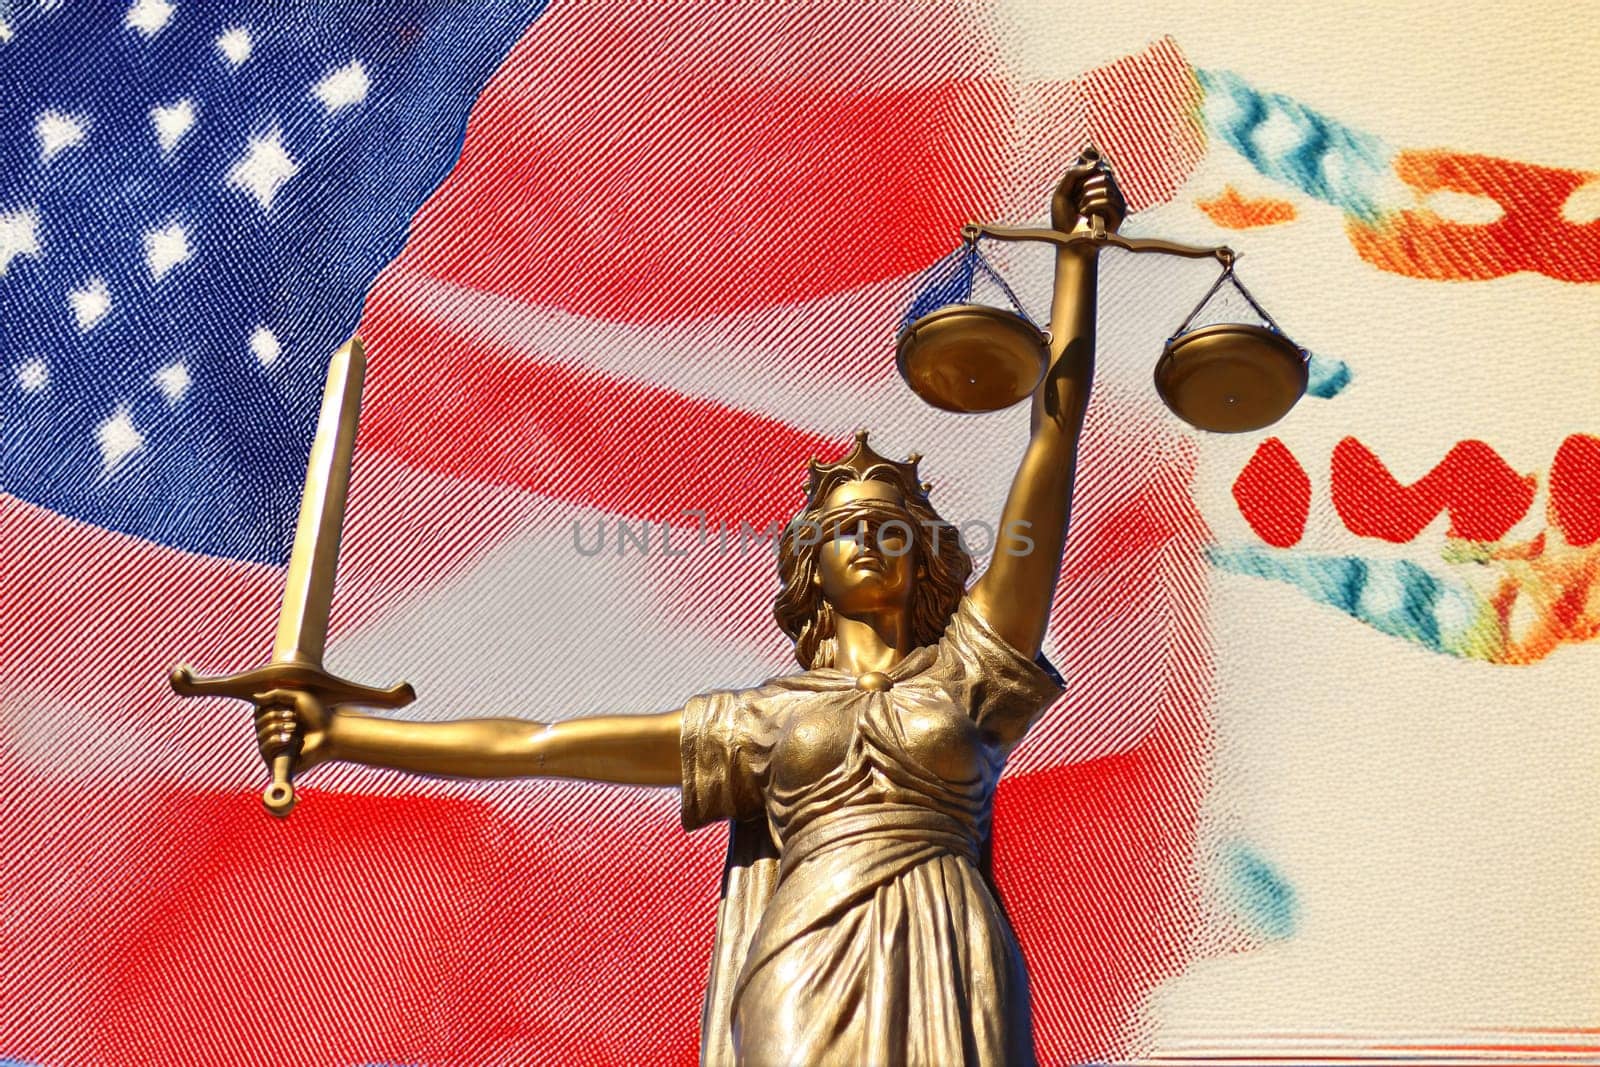 The Statue of Justice, Goddess of Justice in front of the USA flag.